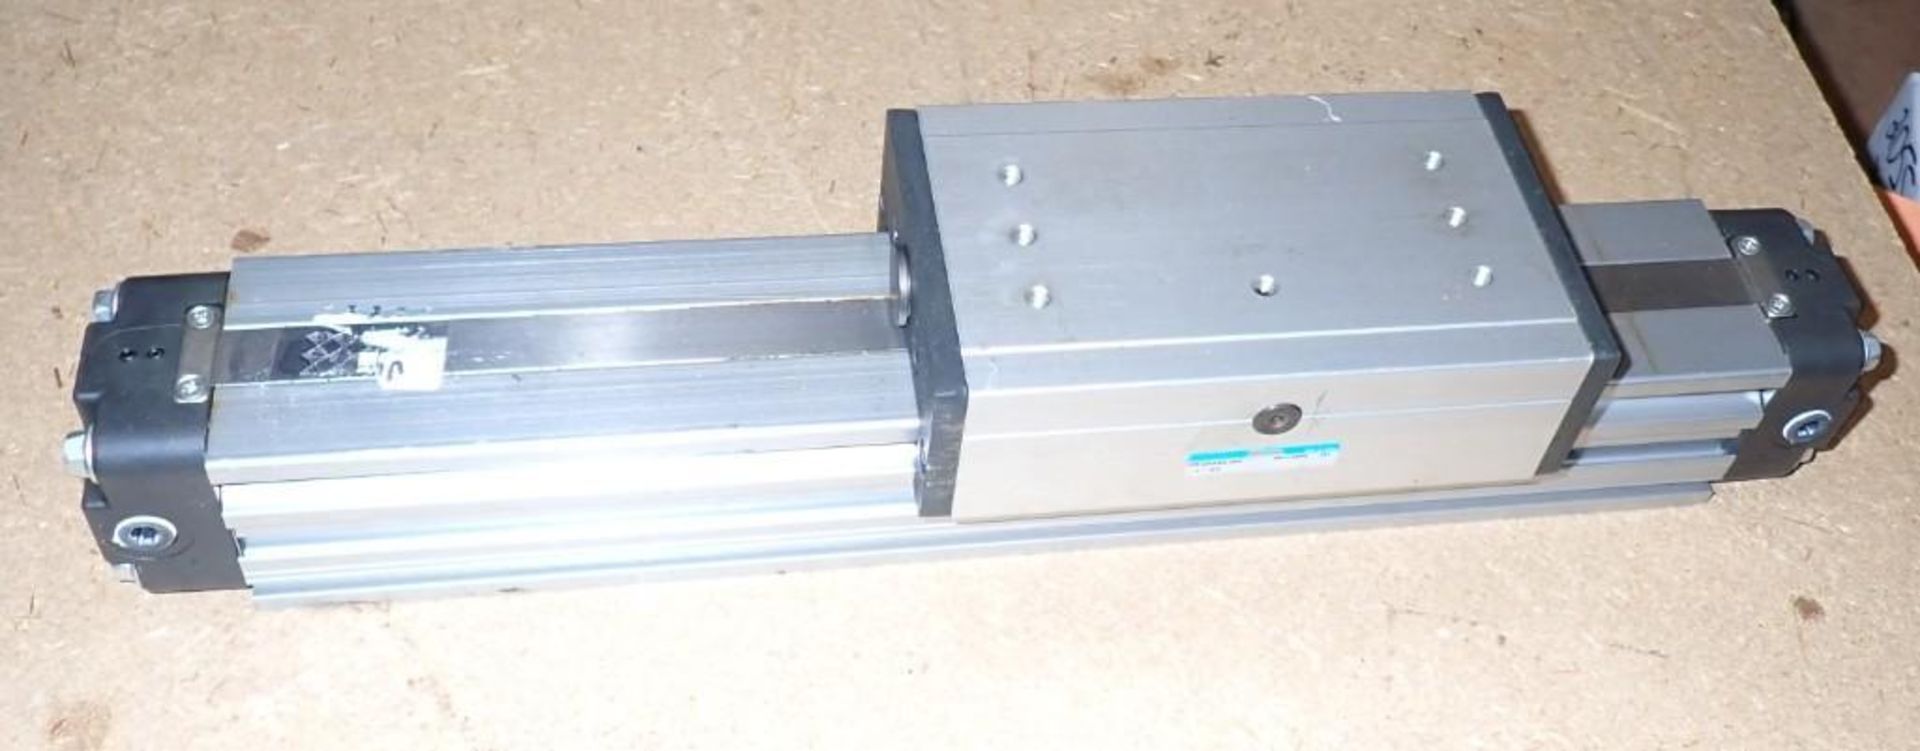 NEW Howa Pneumatic Cylinder, #ORGA40X150-L-K2, NEW OLD STOCK